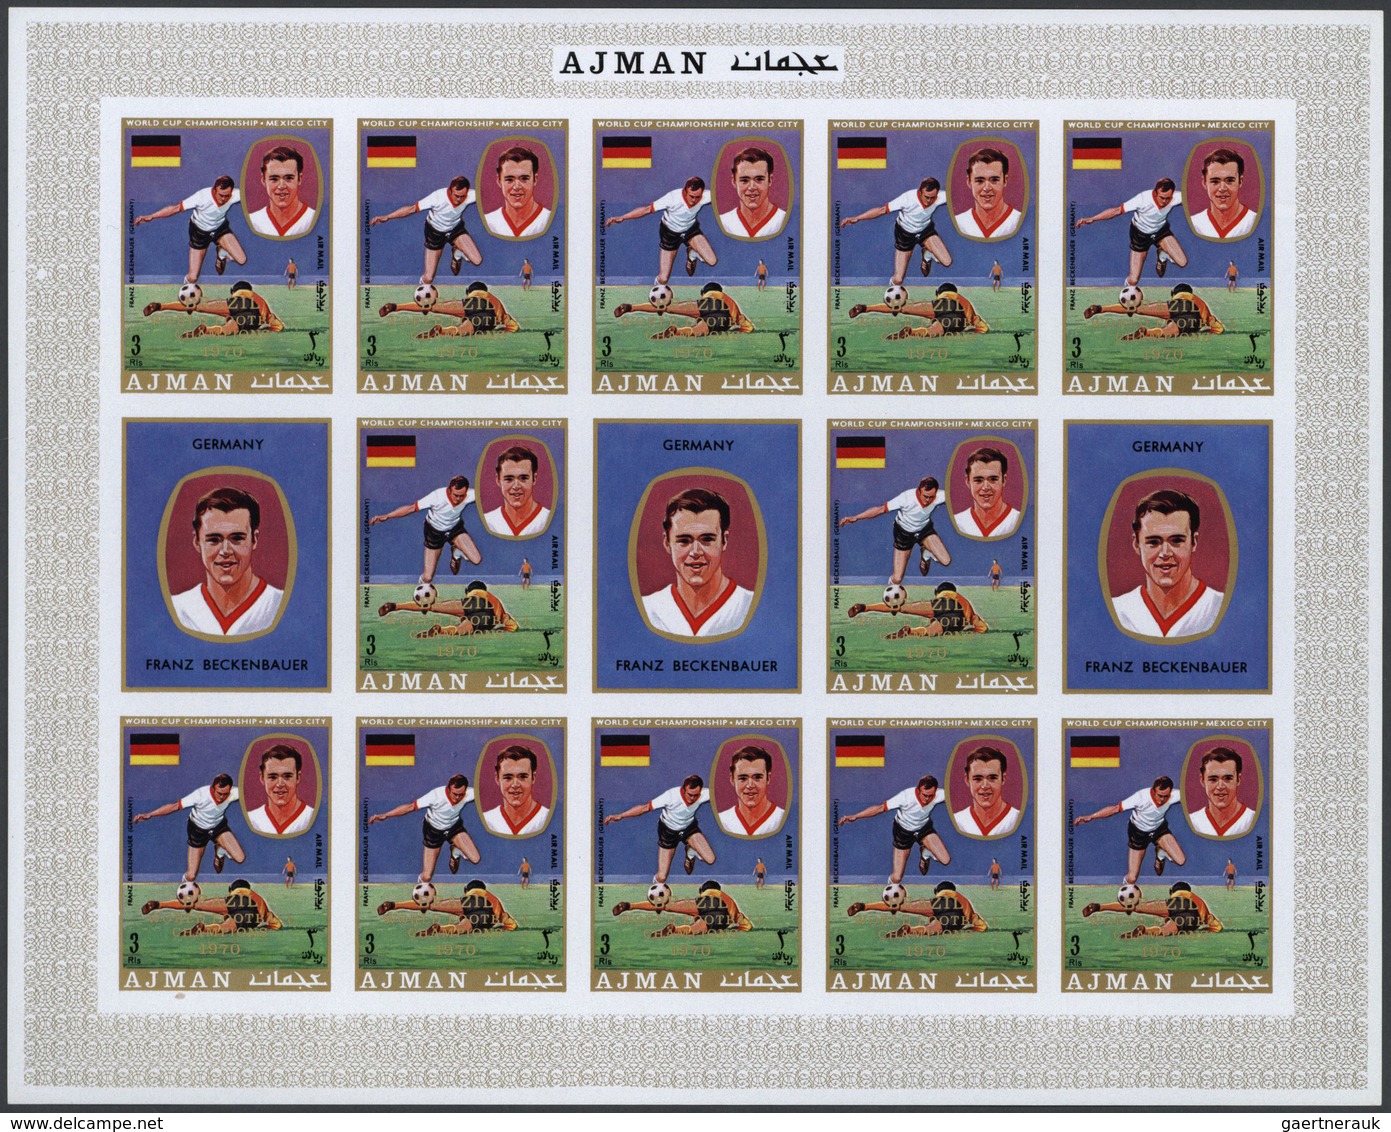 Adschman / Ajman: 1970/1972, comprehensive u/m collection of complete sheets/large units in three bi